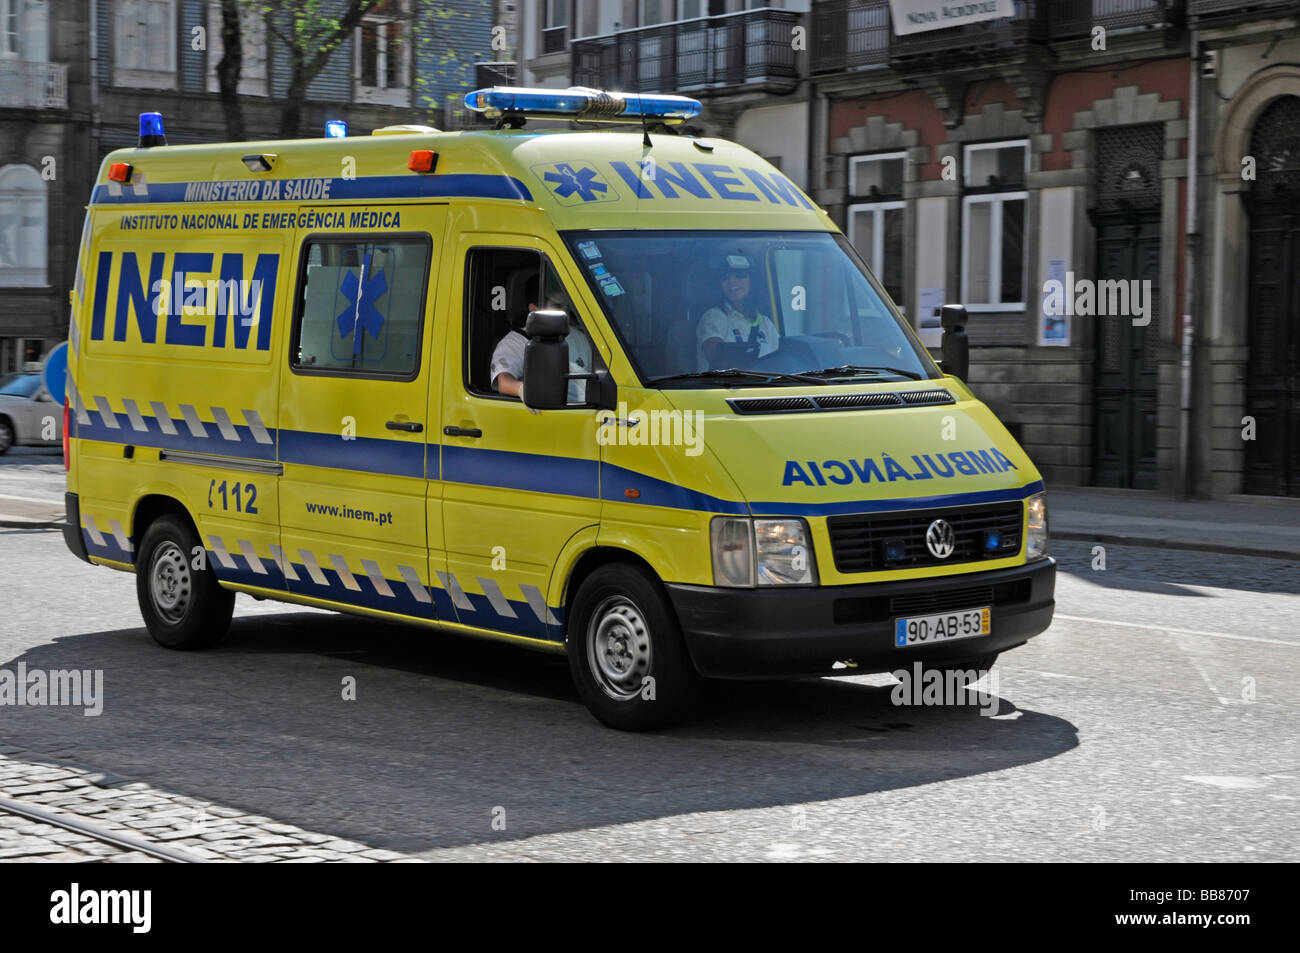 Emergency ambulance in action, Porto, Northern Portugal, Europe Stock Photo